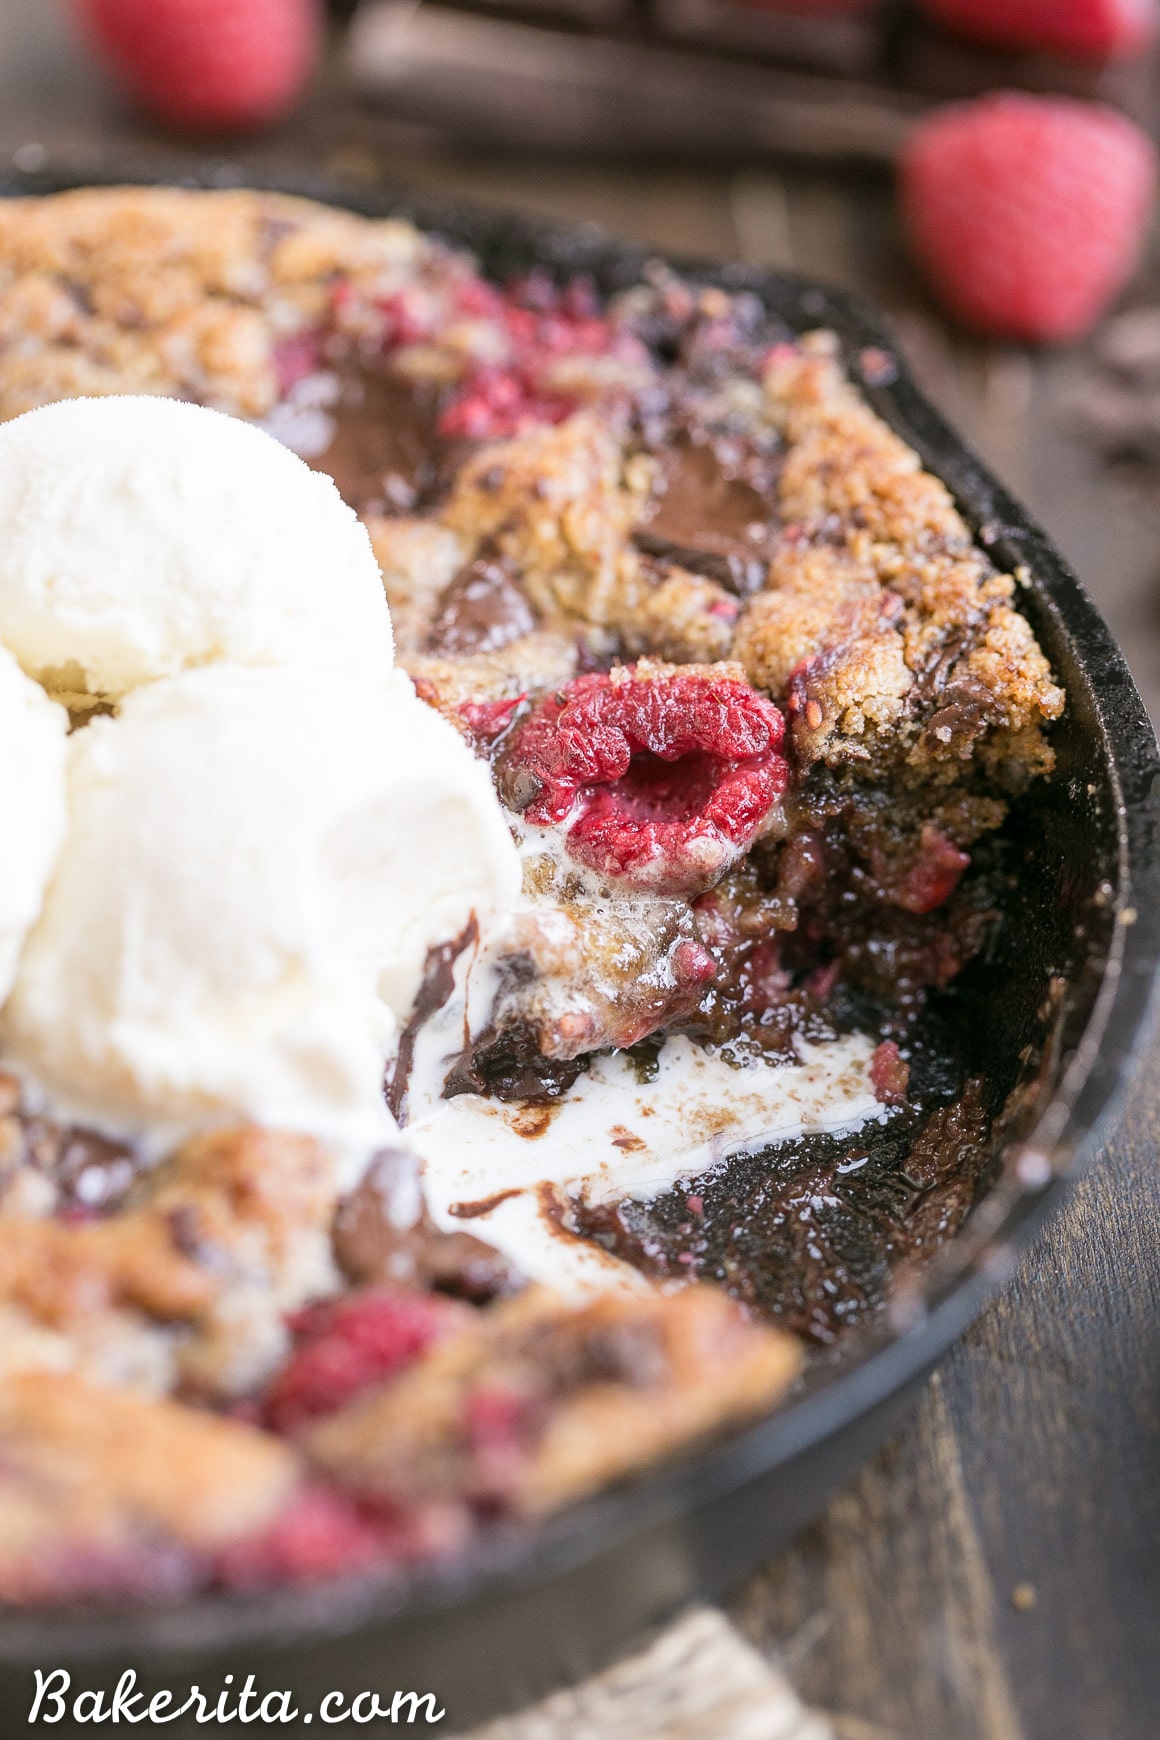 This Raspberry Chocolate Chunk Skillet Cookie is an easy, one bowl recipe loaded with fresh raspberries and dark chocolate chunks. This gooey skillet cookie is gluten-free, Paleo, and refined sugar free.